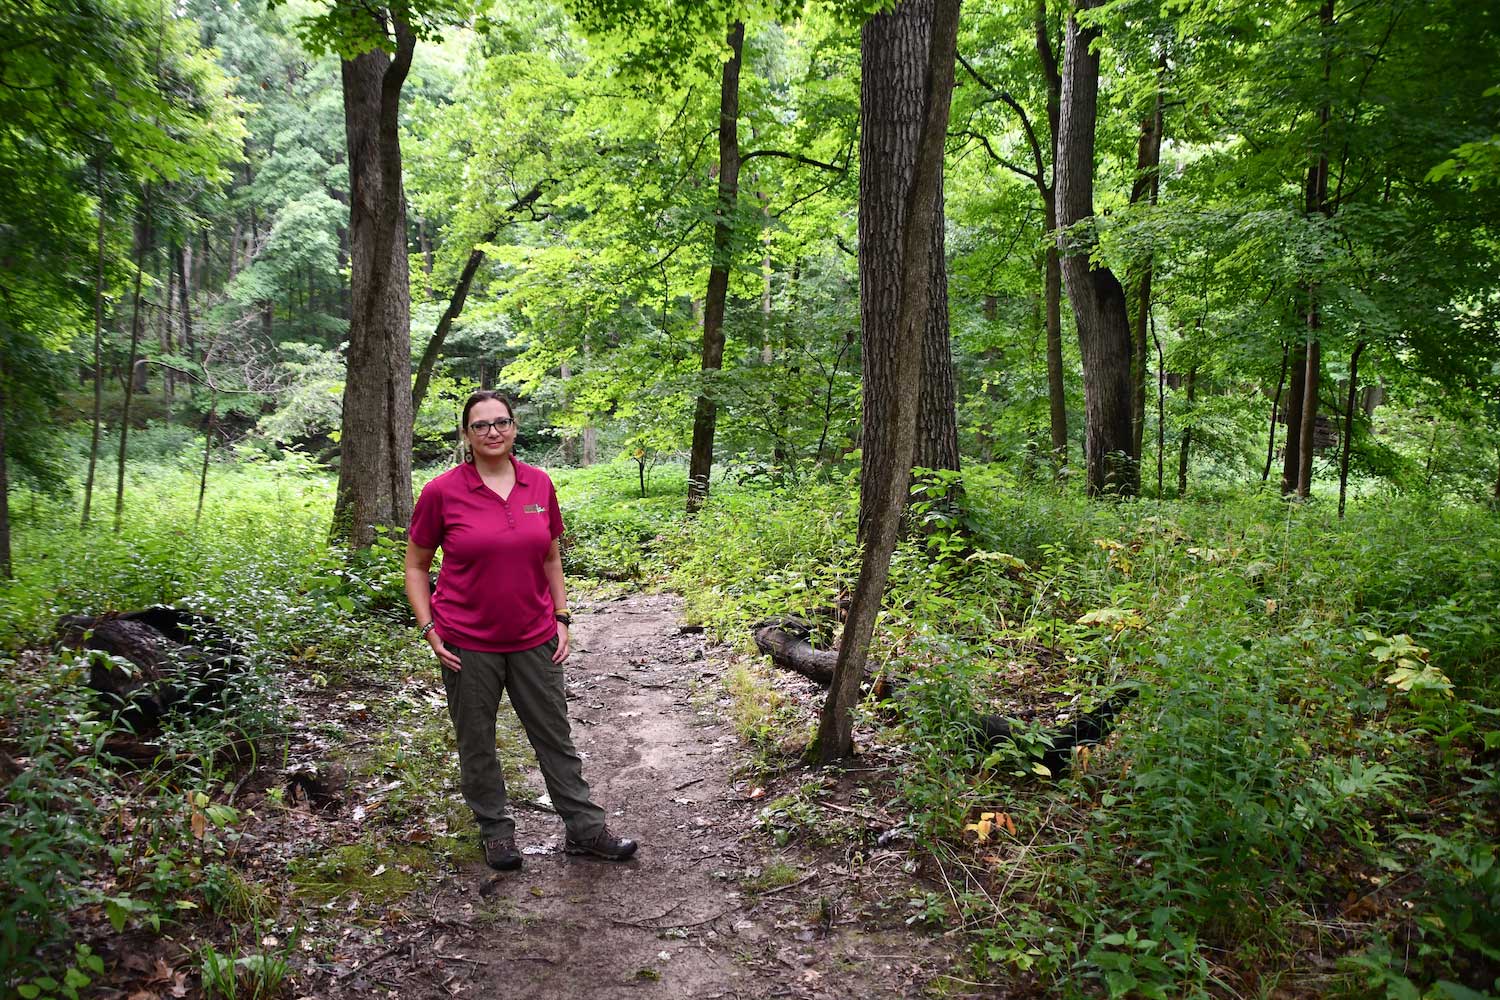 A person standing along a dirt trail in a forest.